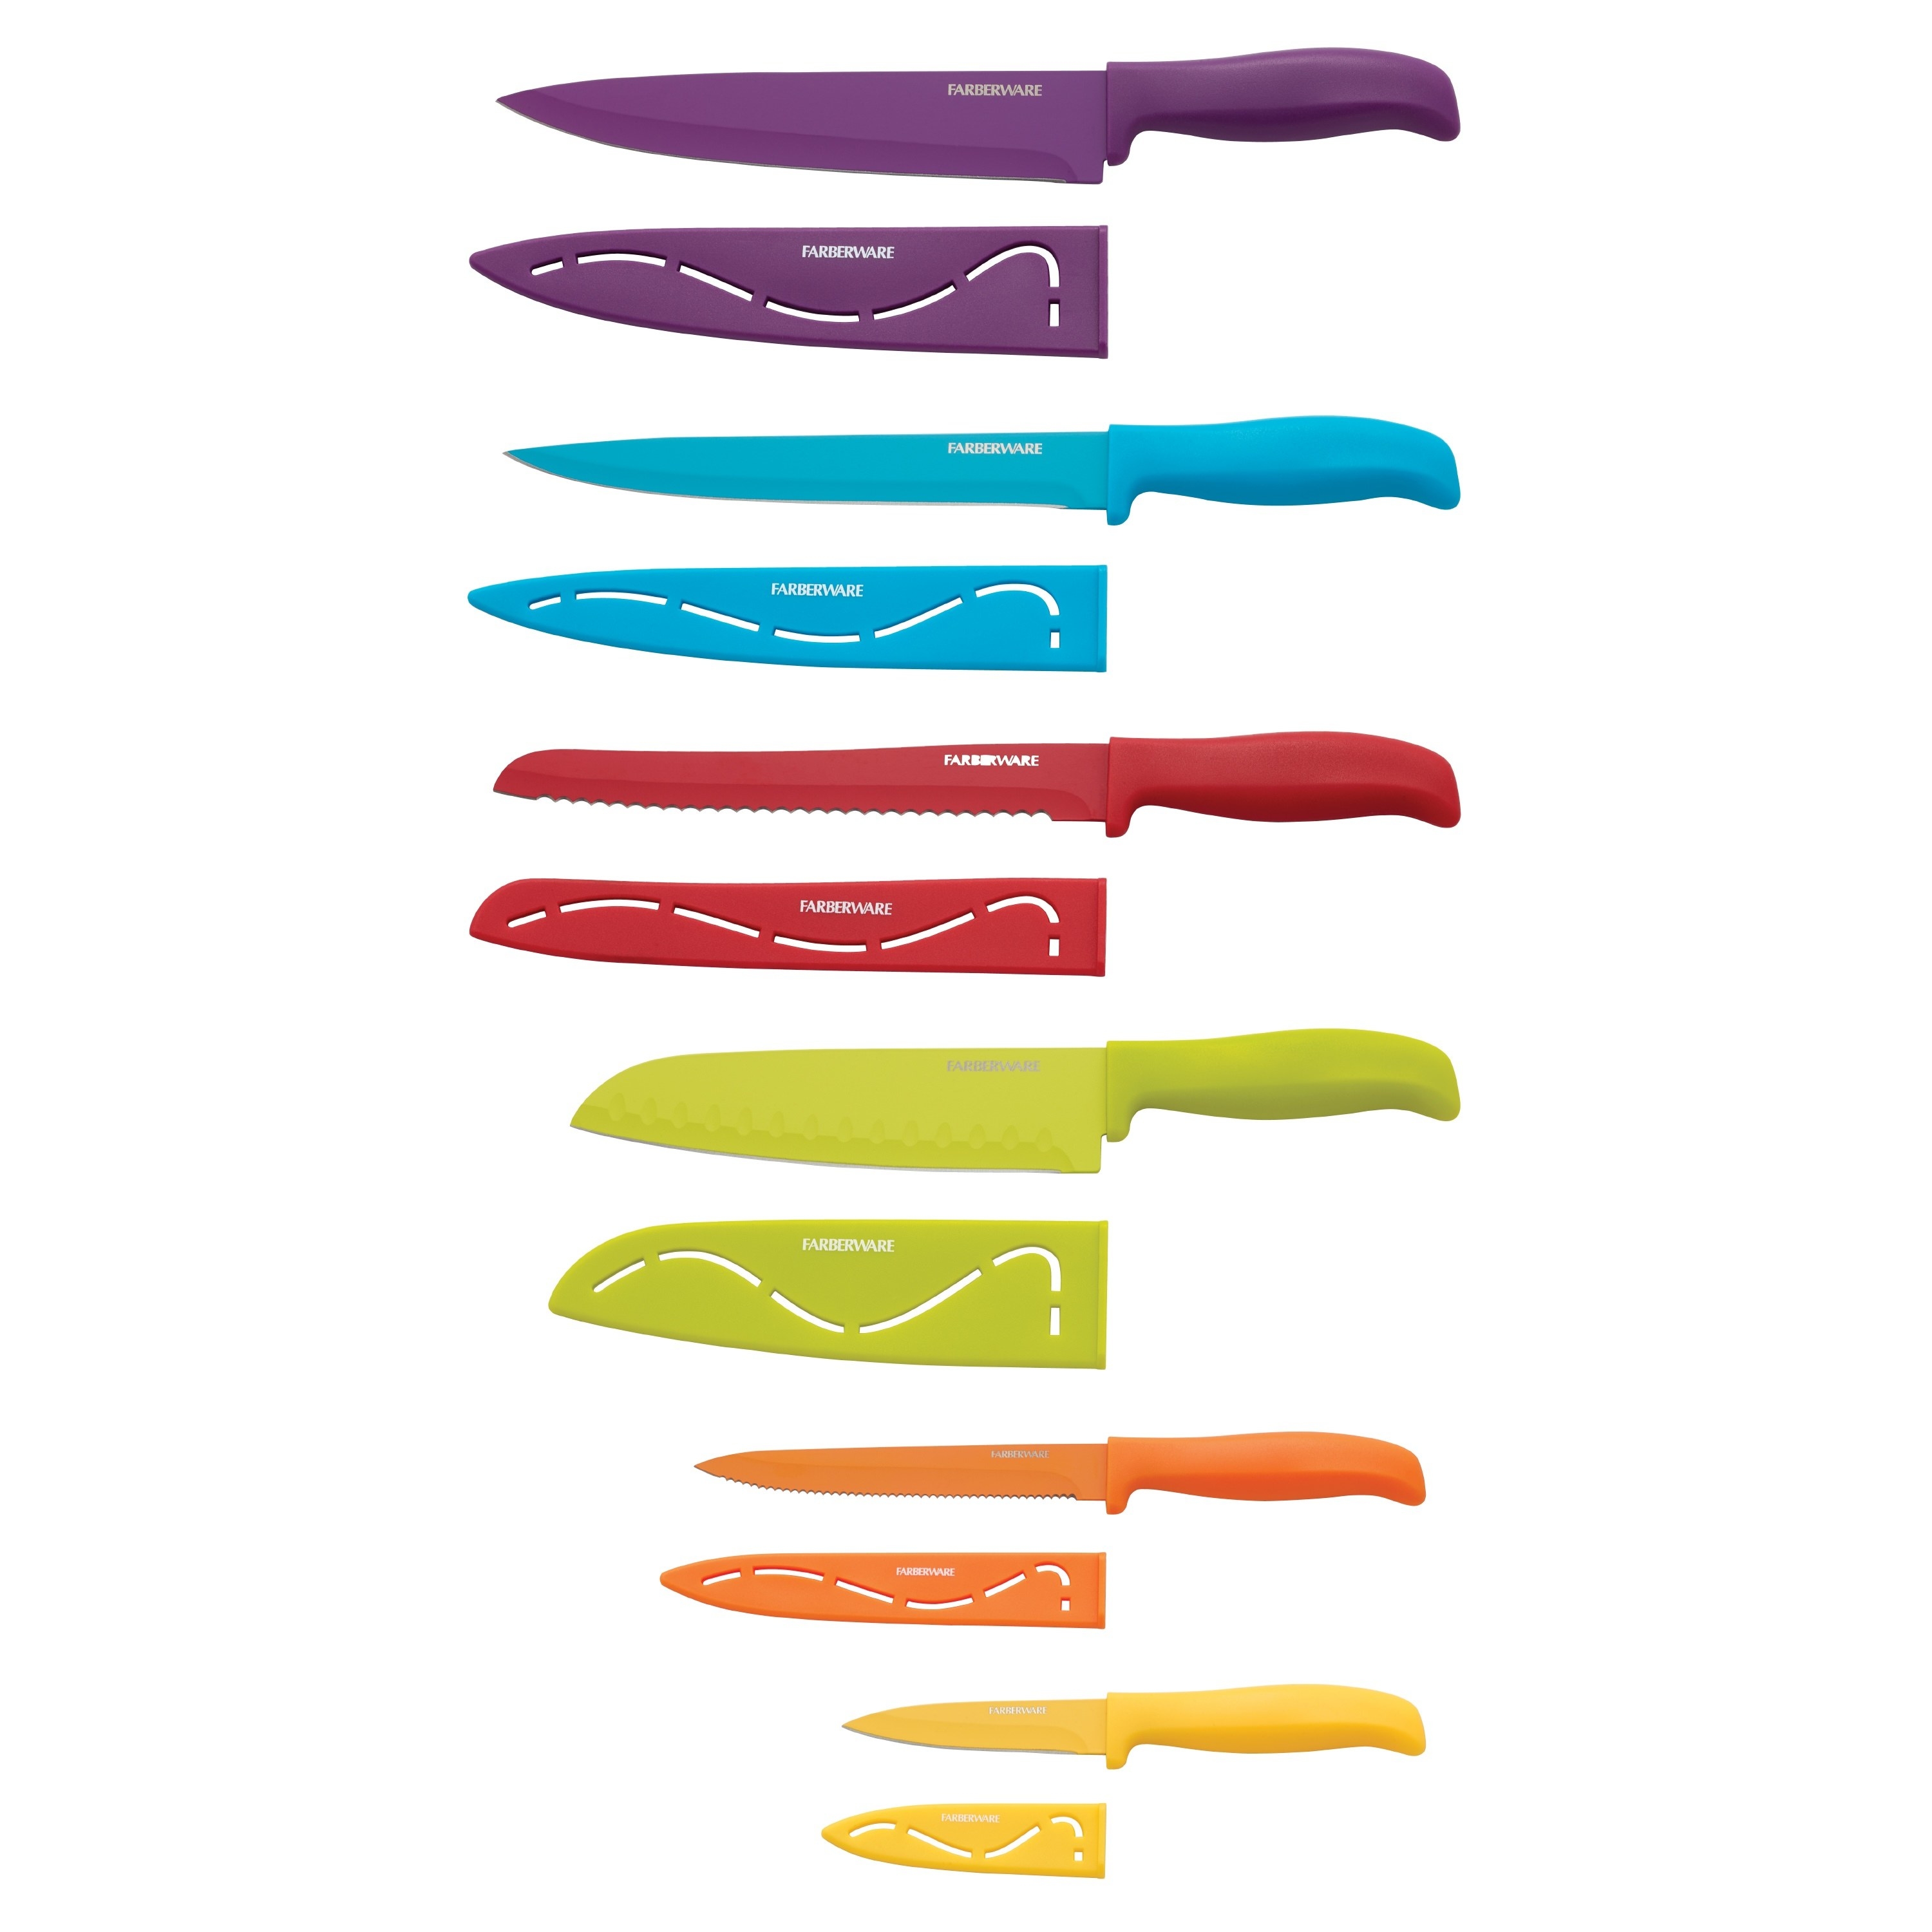 knives of different sizes in different colors 